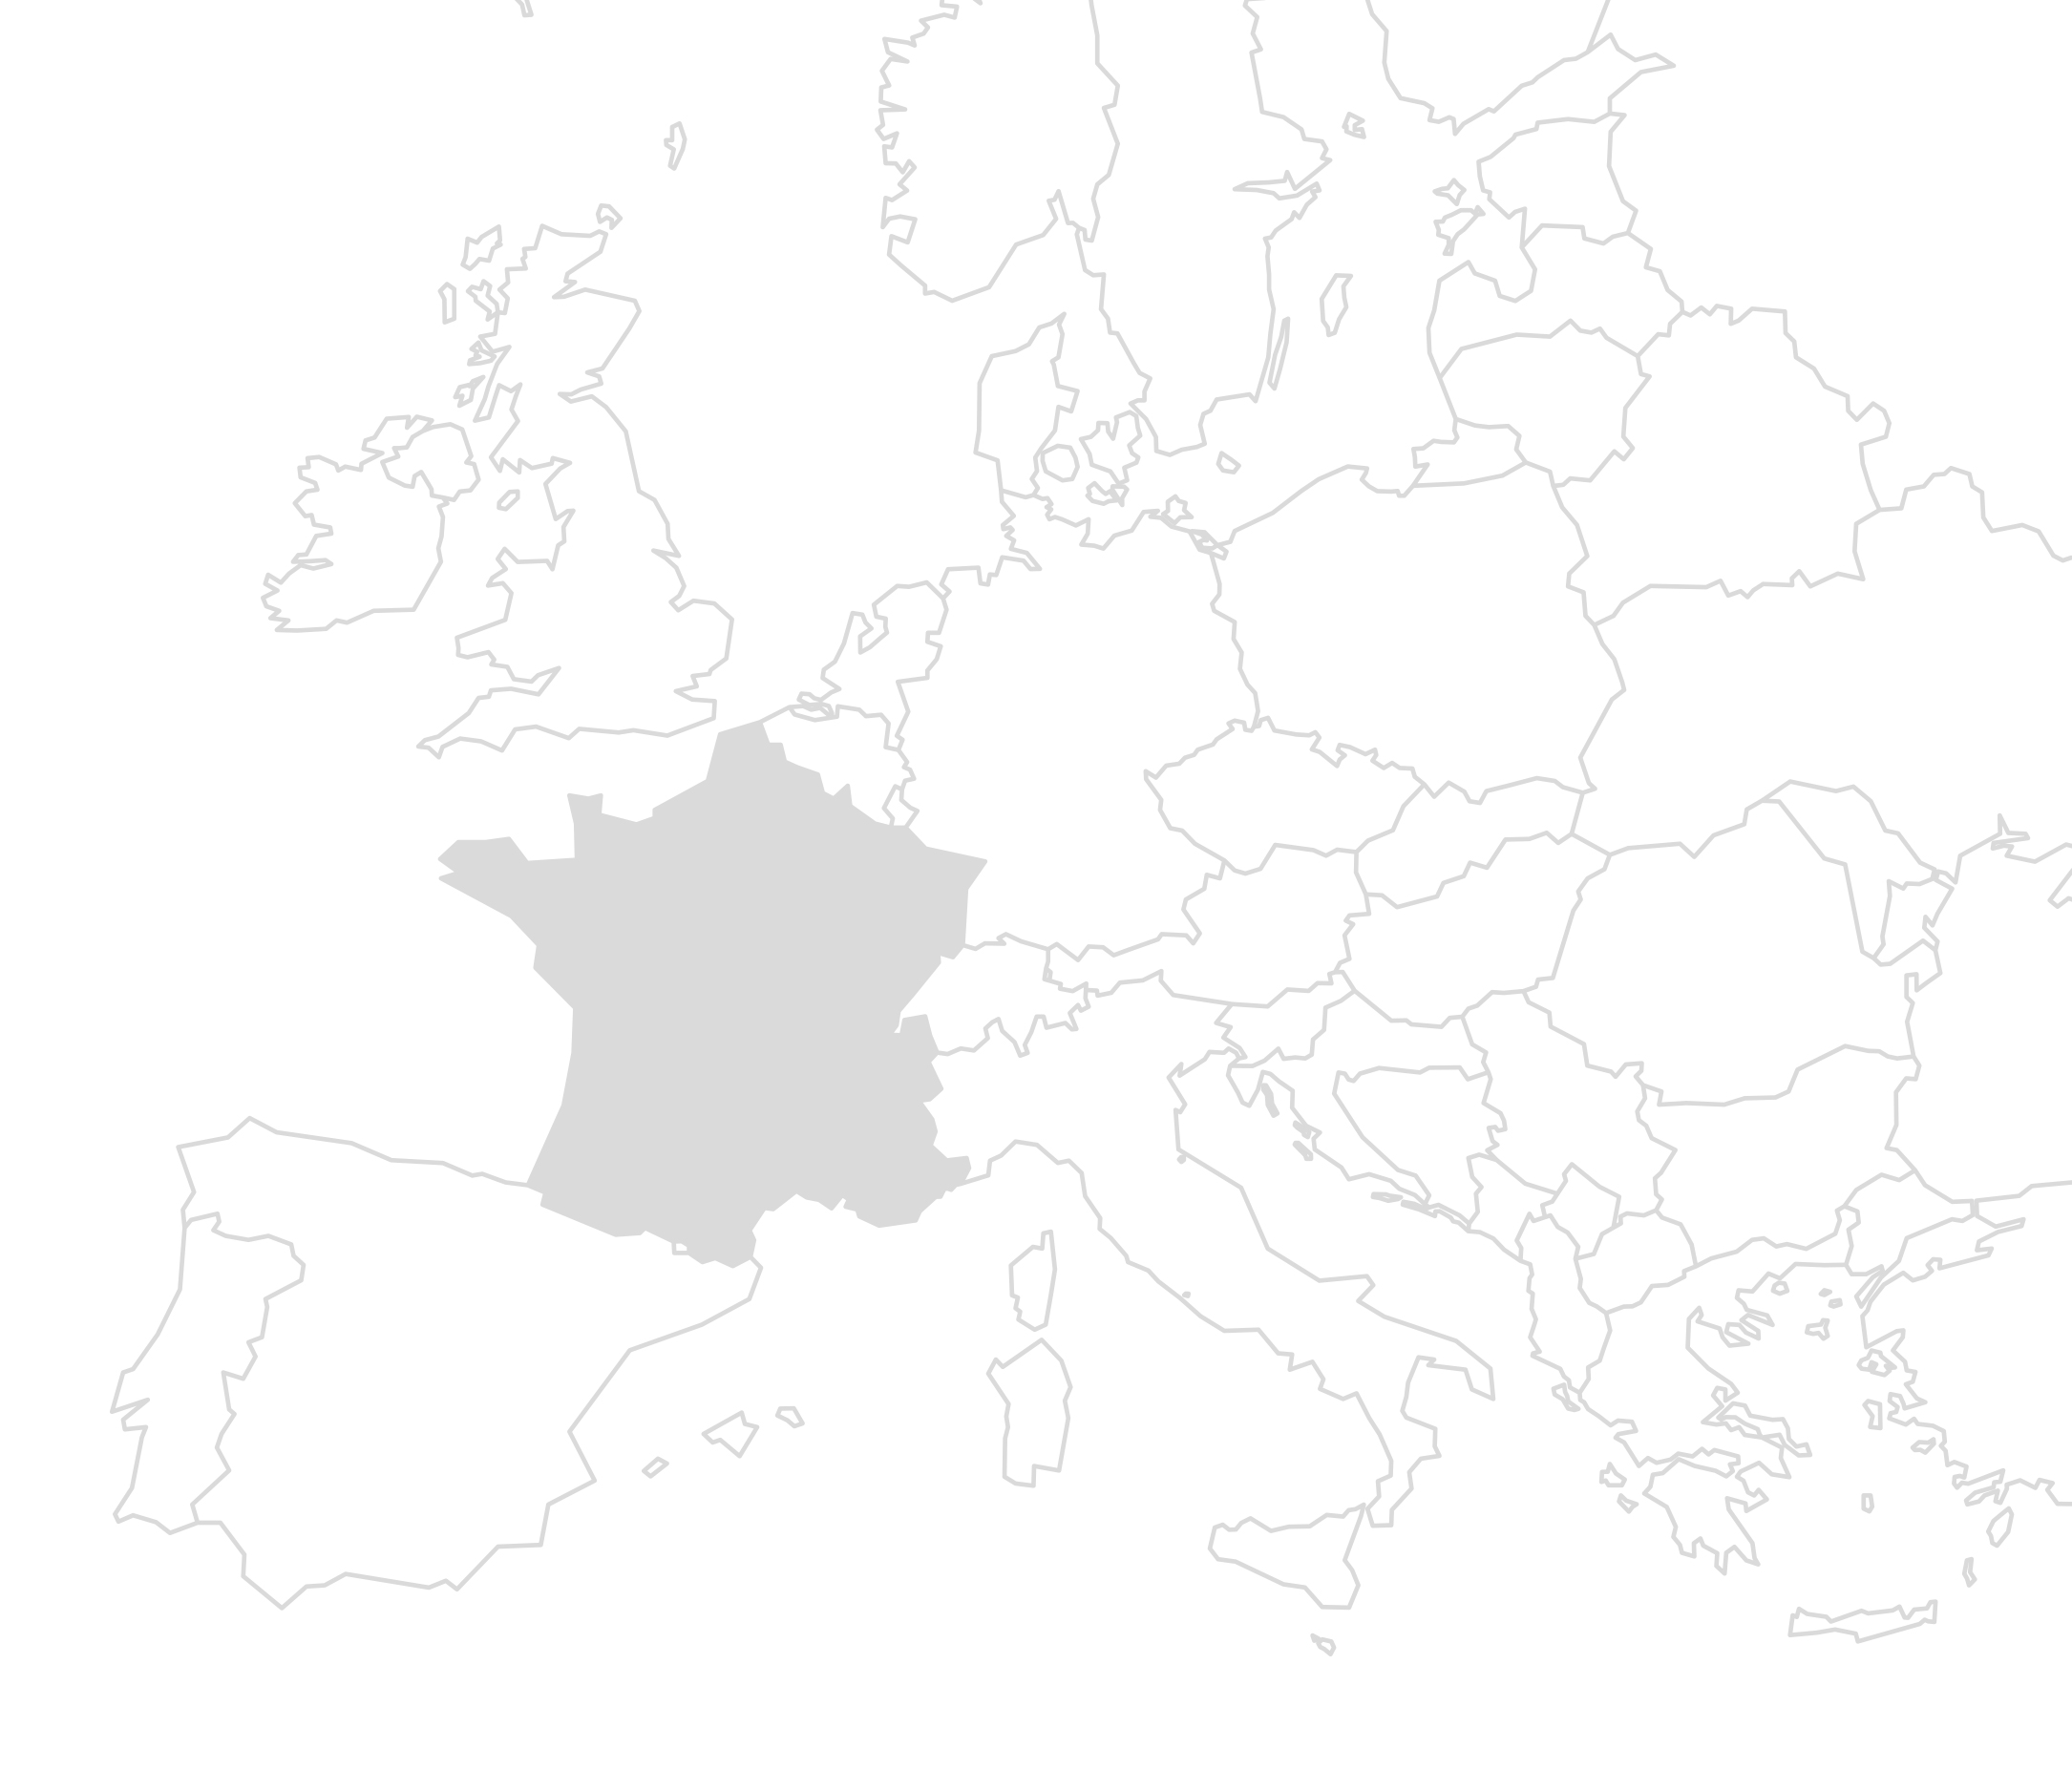 Simplified map of Europe with France highlighted in the center, surrounded by country borders without labels.